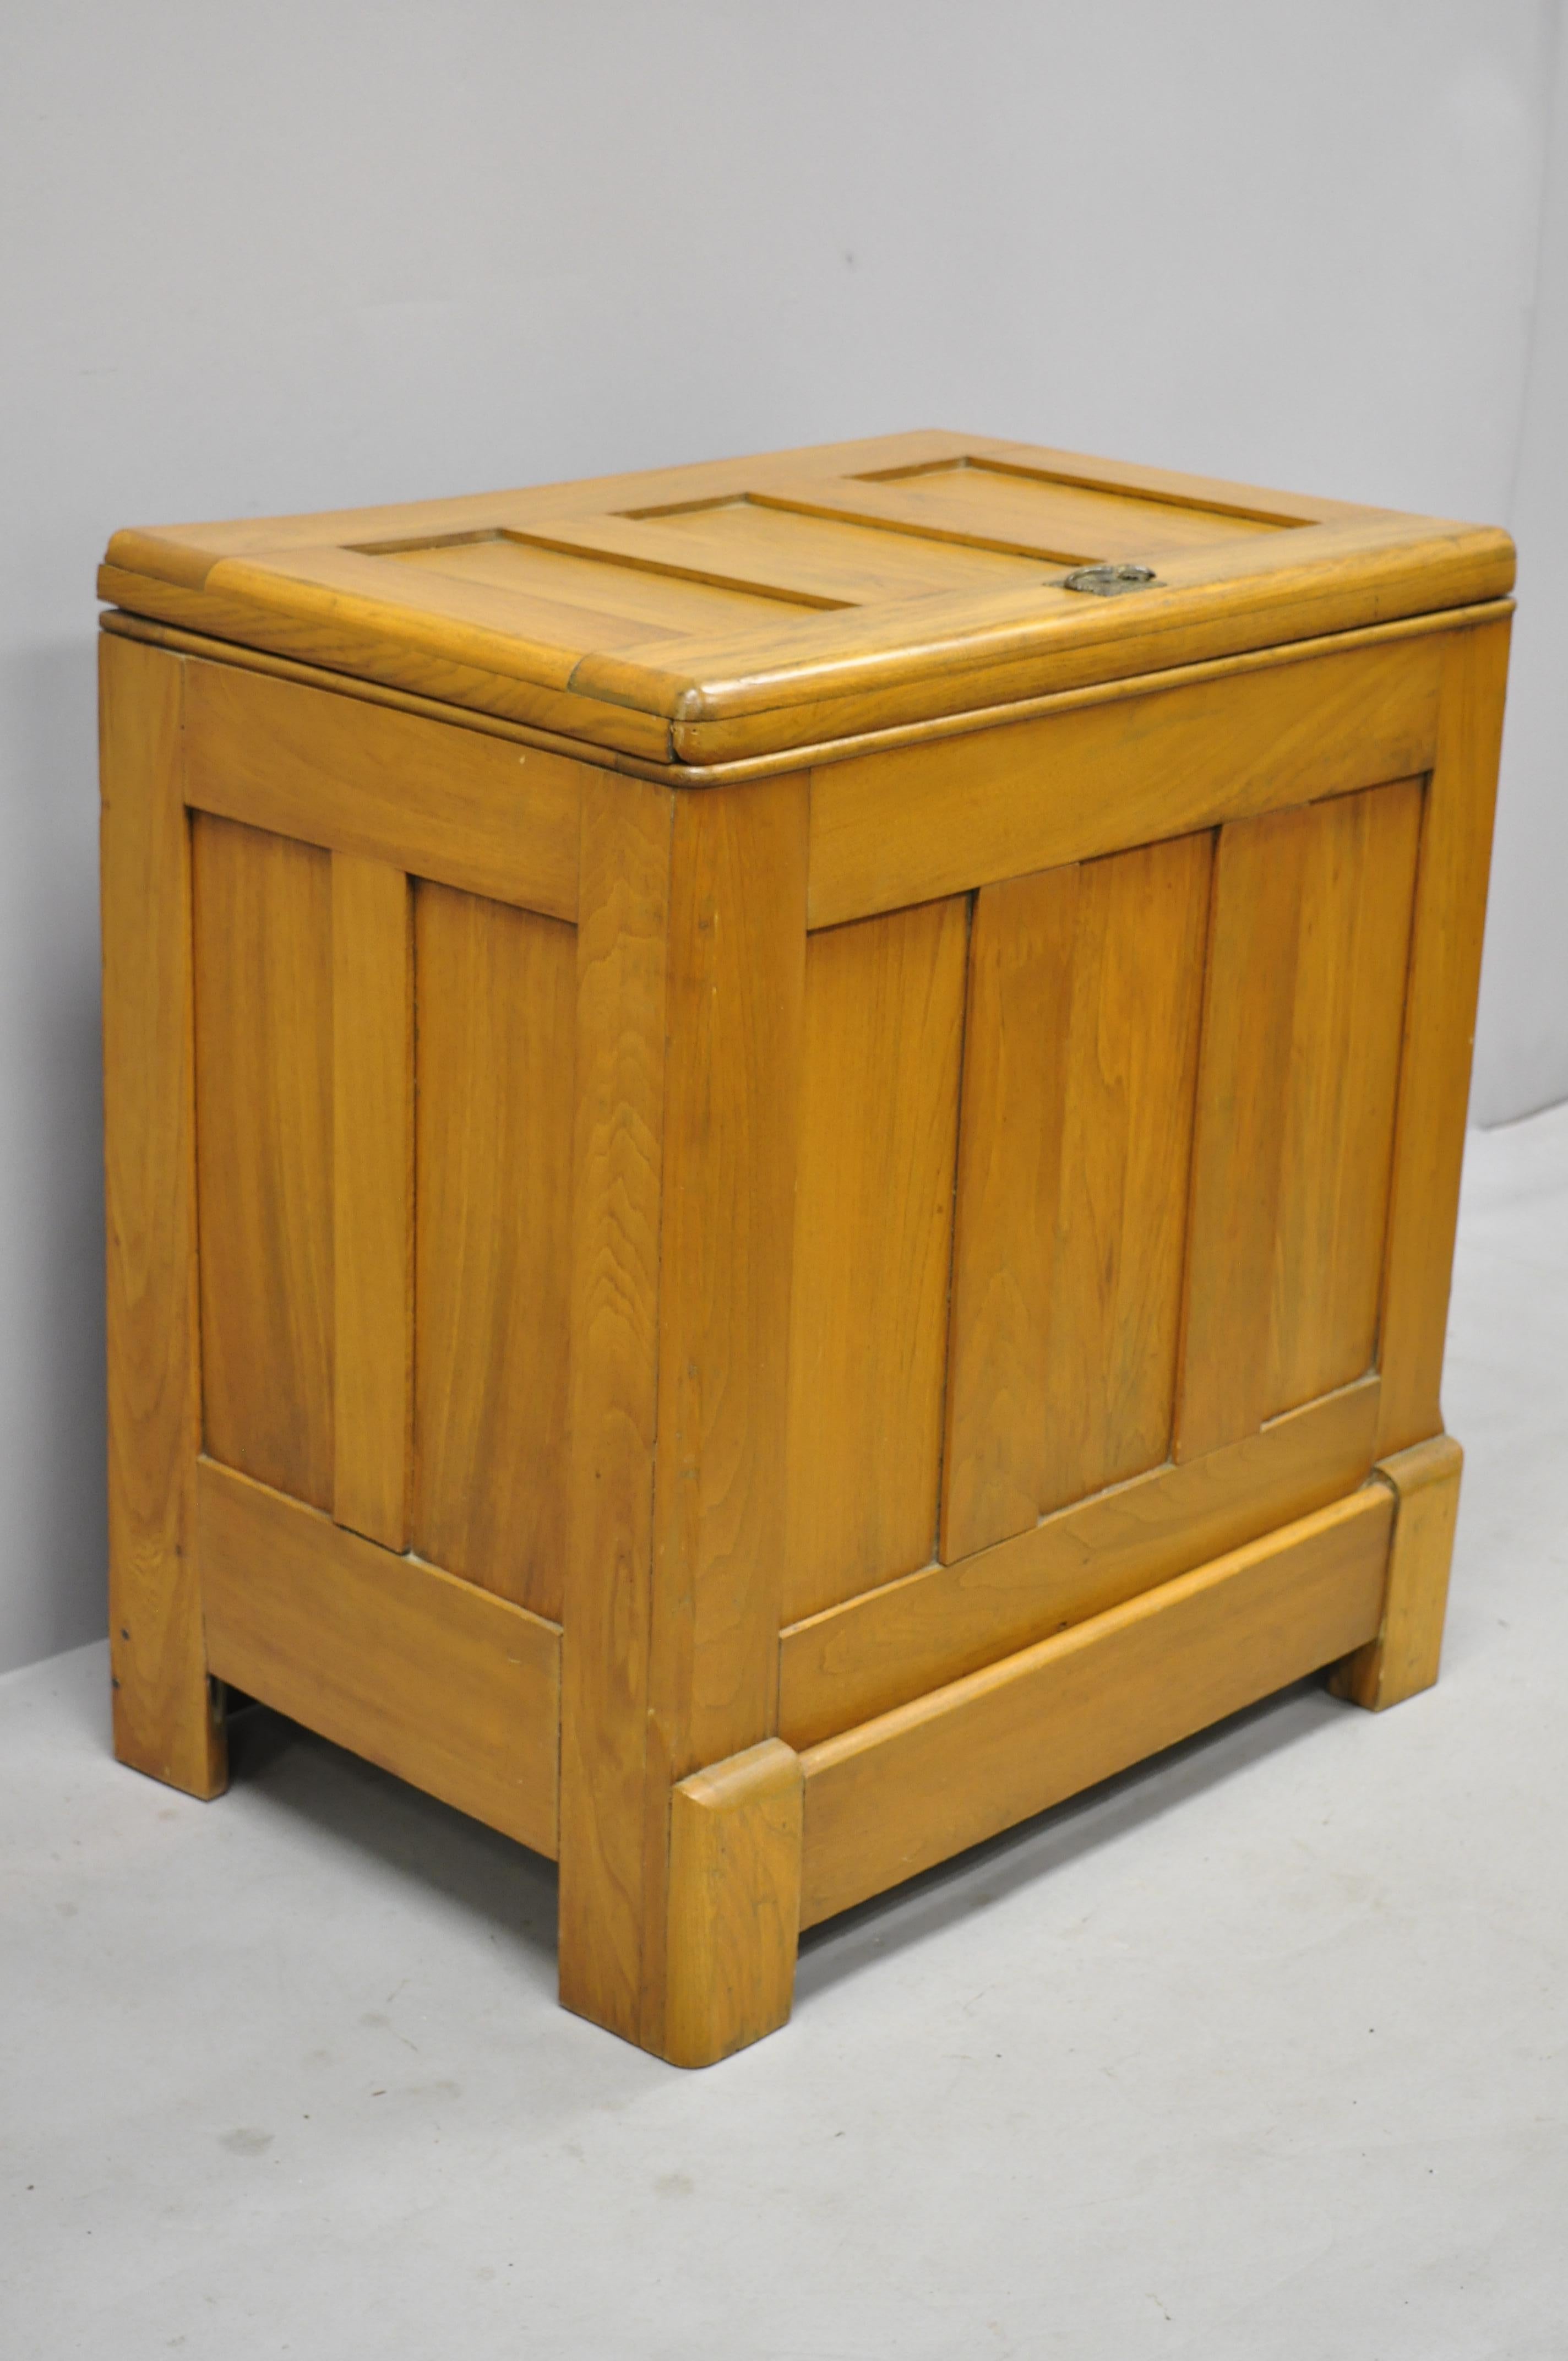 Antique Gibson Refrigerator Co. small oak icebox ice chest. Item features solid wood construction, beautiful wood grain, 4 tin metal shelves, quality American, circa 1900. Measurements: 33